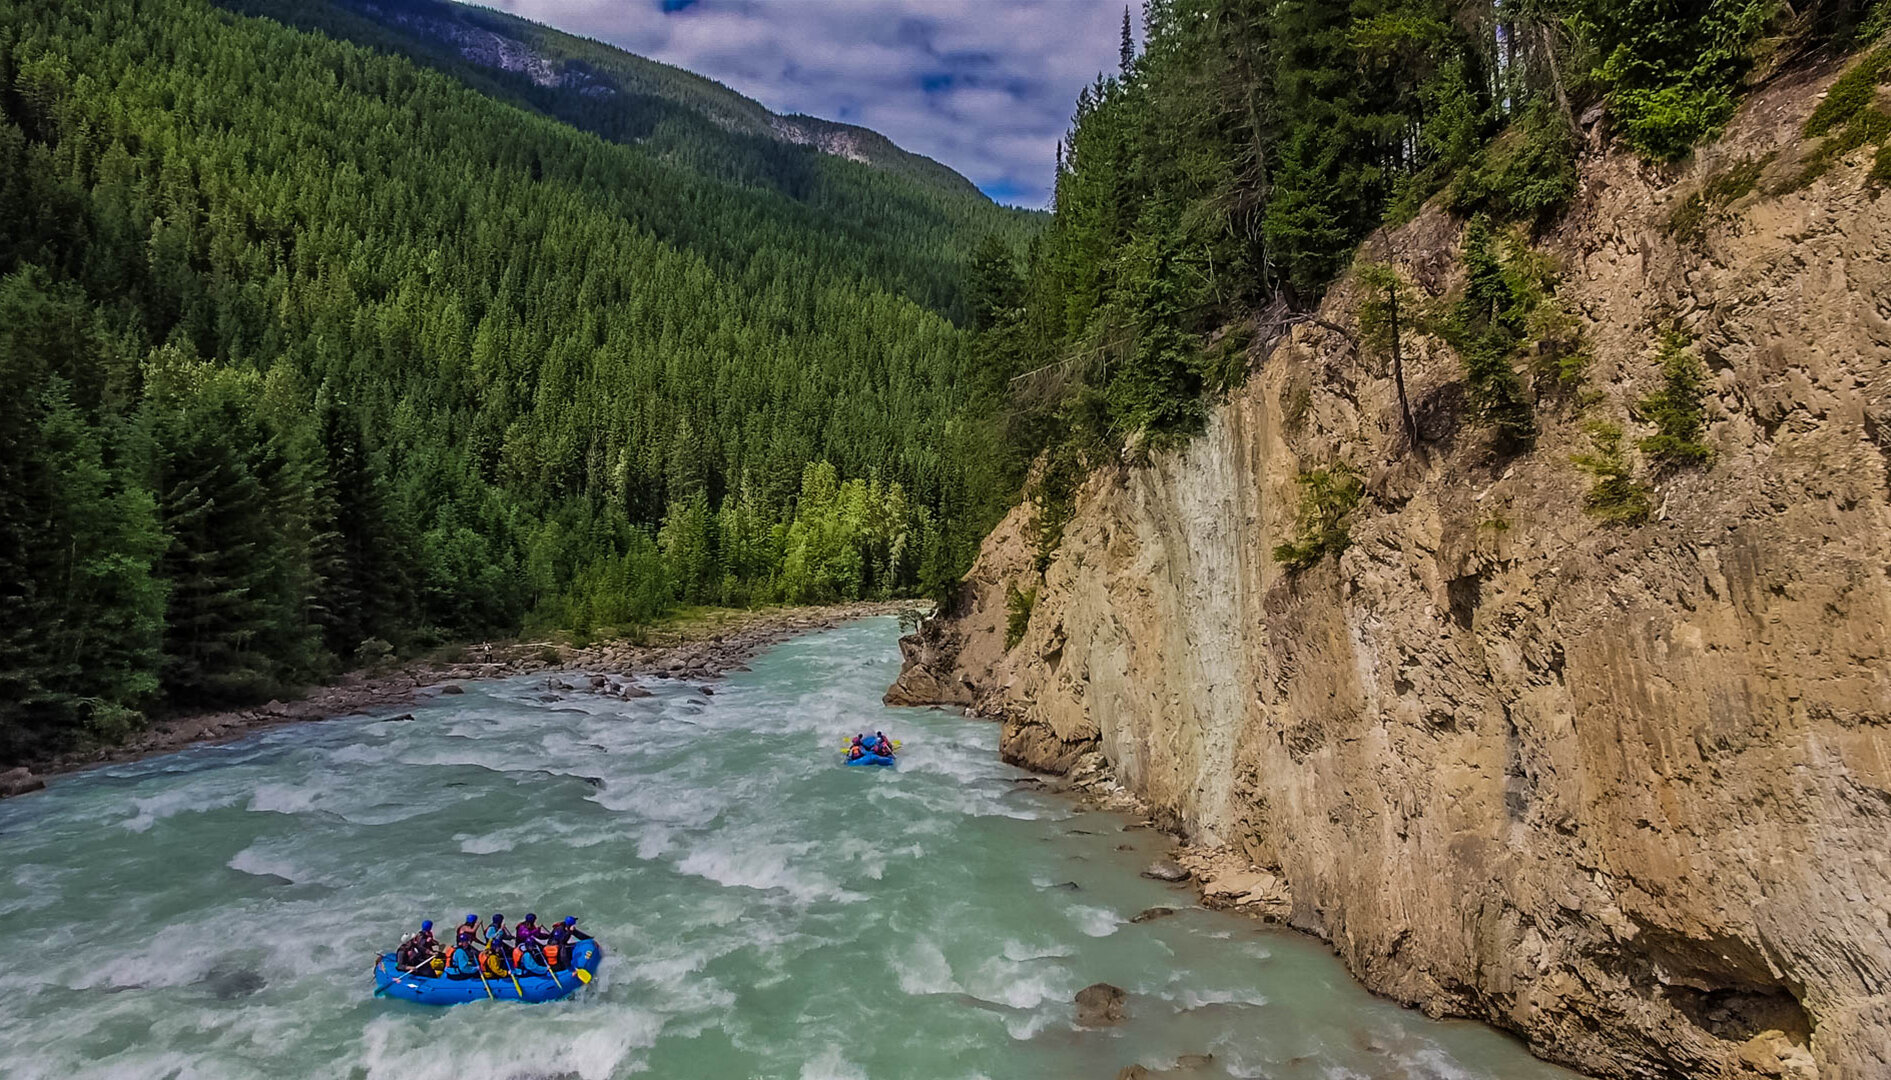 Rafting in the Kicking Horse Canyon in BC